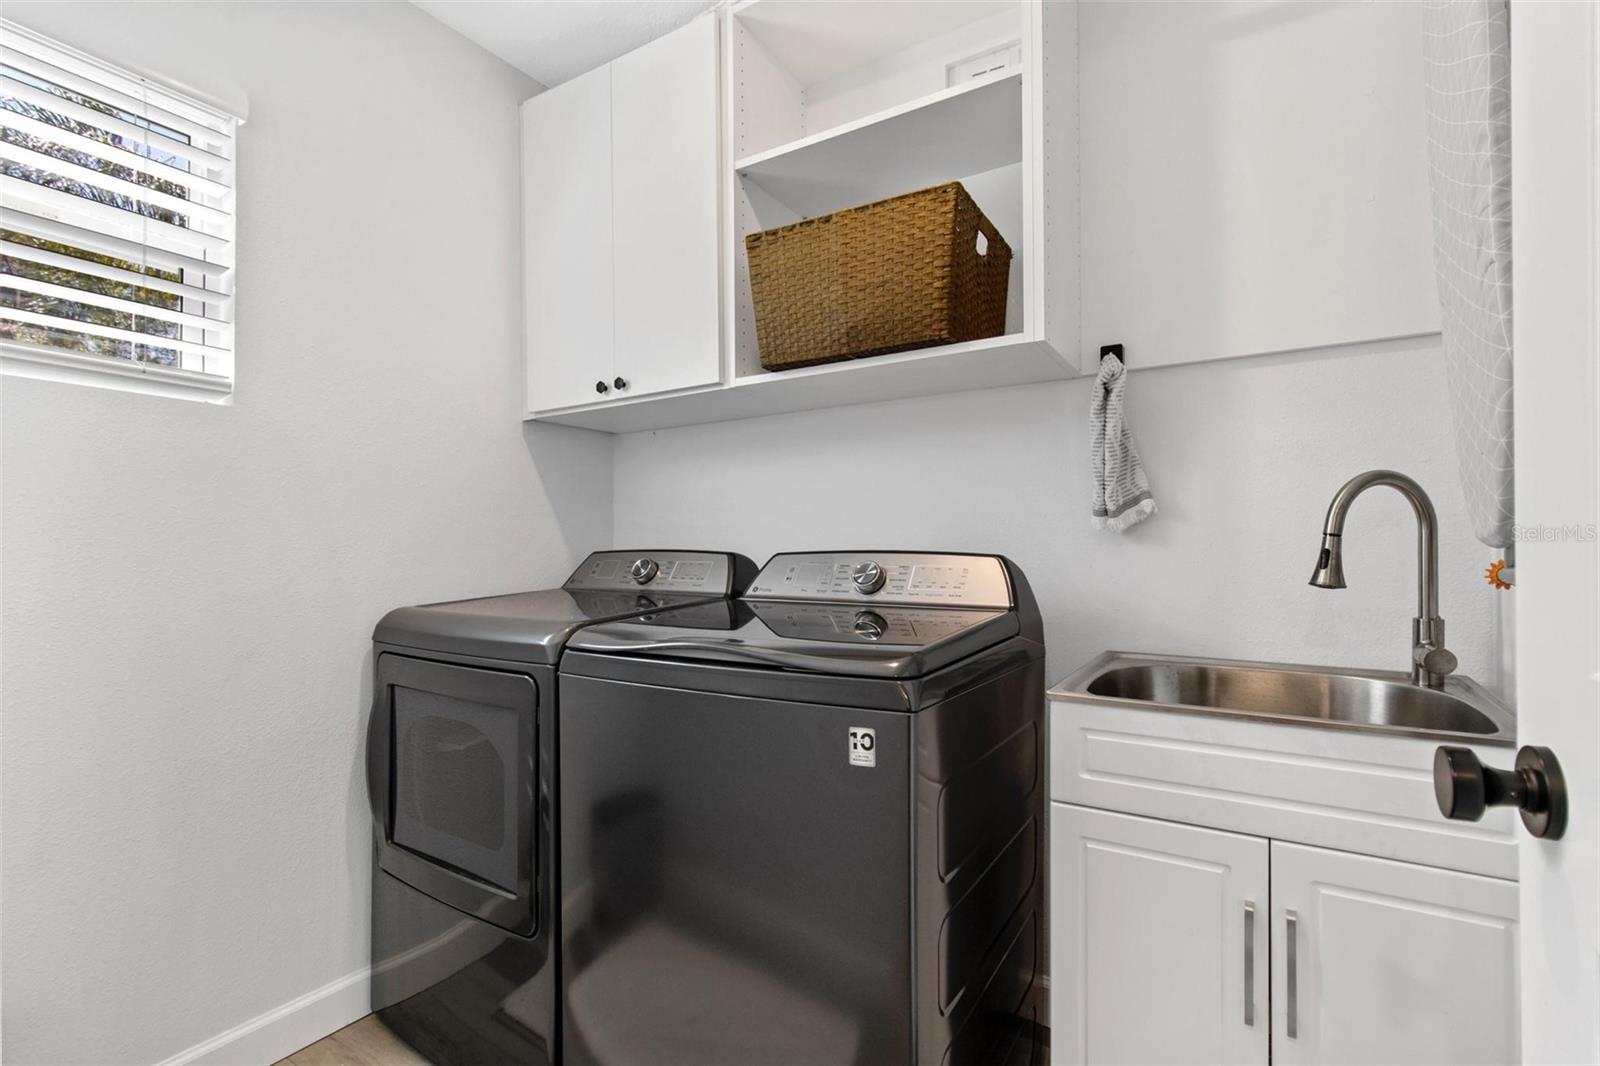 First floor laundry room is equipped with GE washer and dryer units, a sink, and cabinetry for extra convenience.